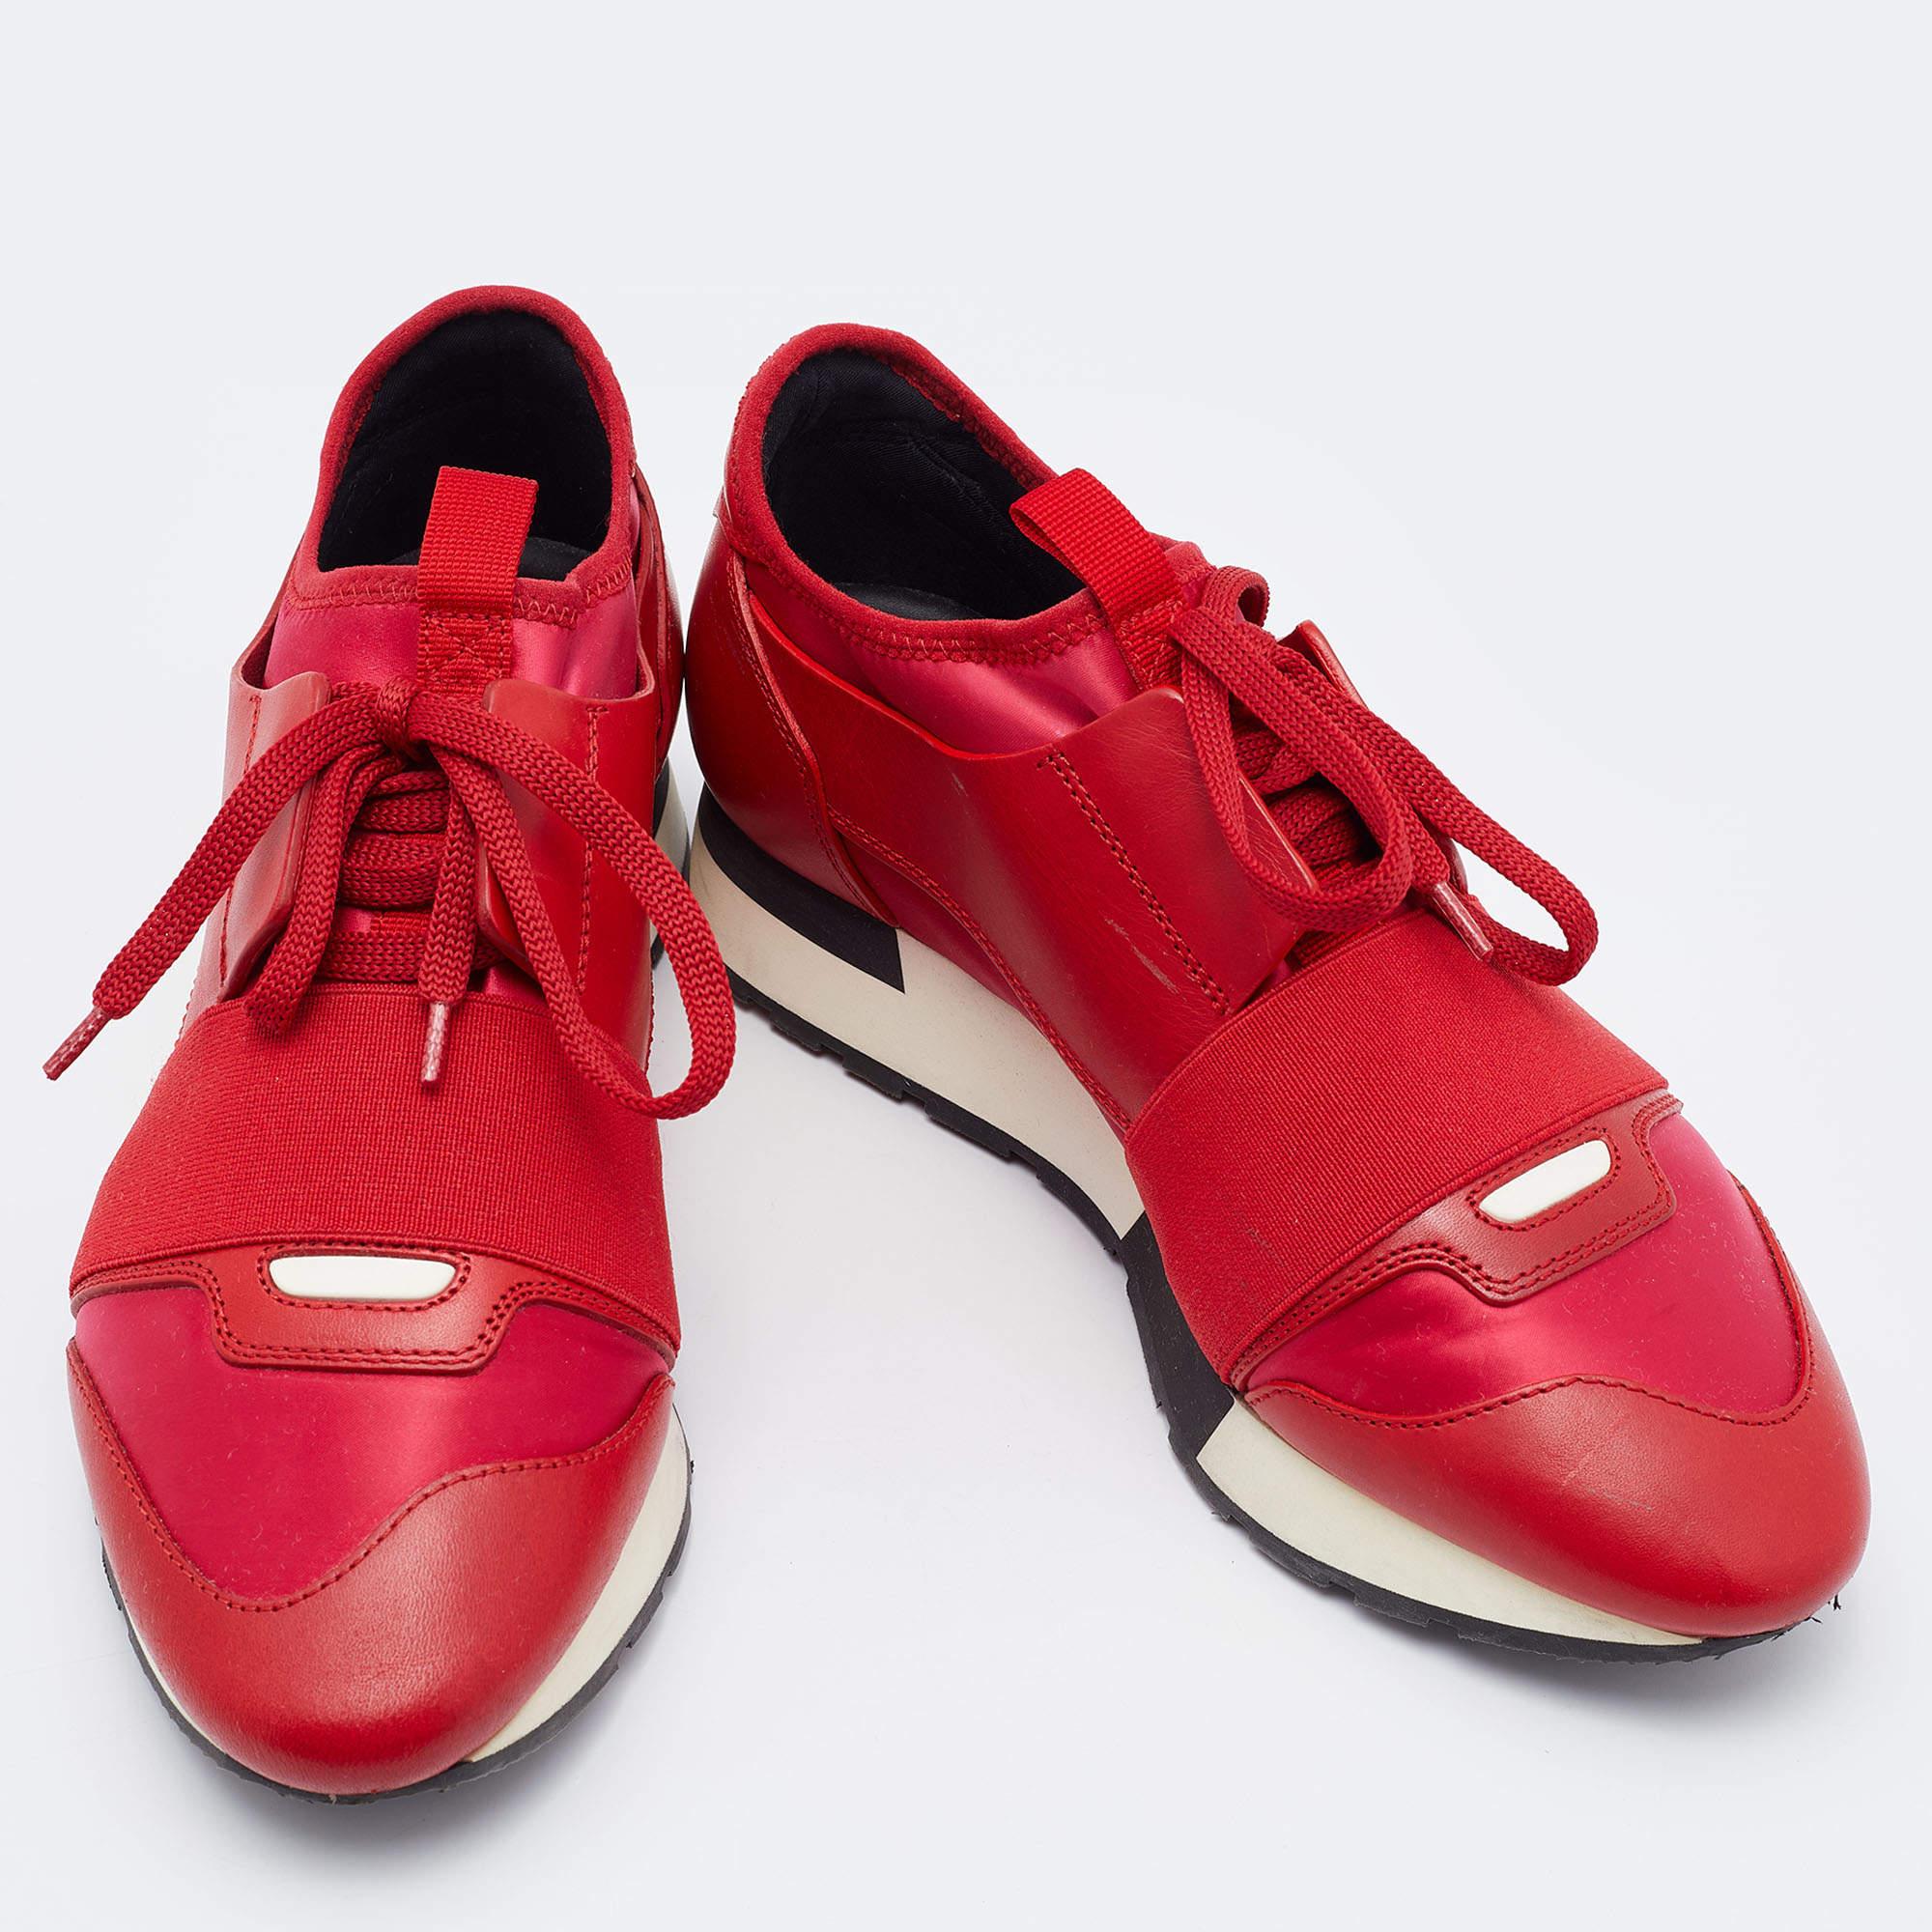 Balenciaga Red Leather and Neoprene Race Runner Low Top Sneakers Size 37 1